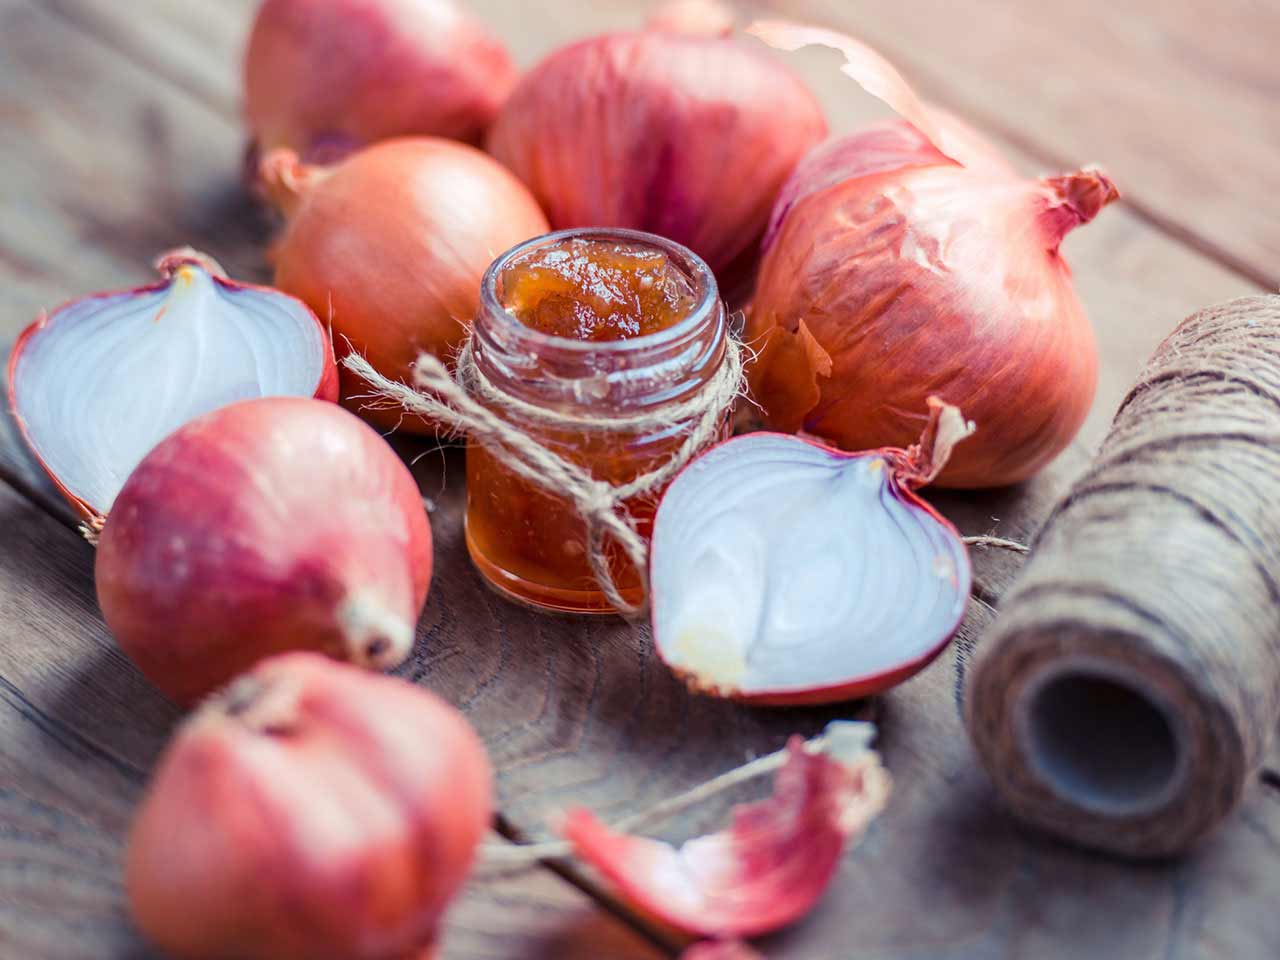 Onion marmalade surrounded by onions on wooden table